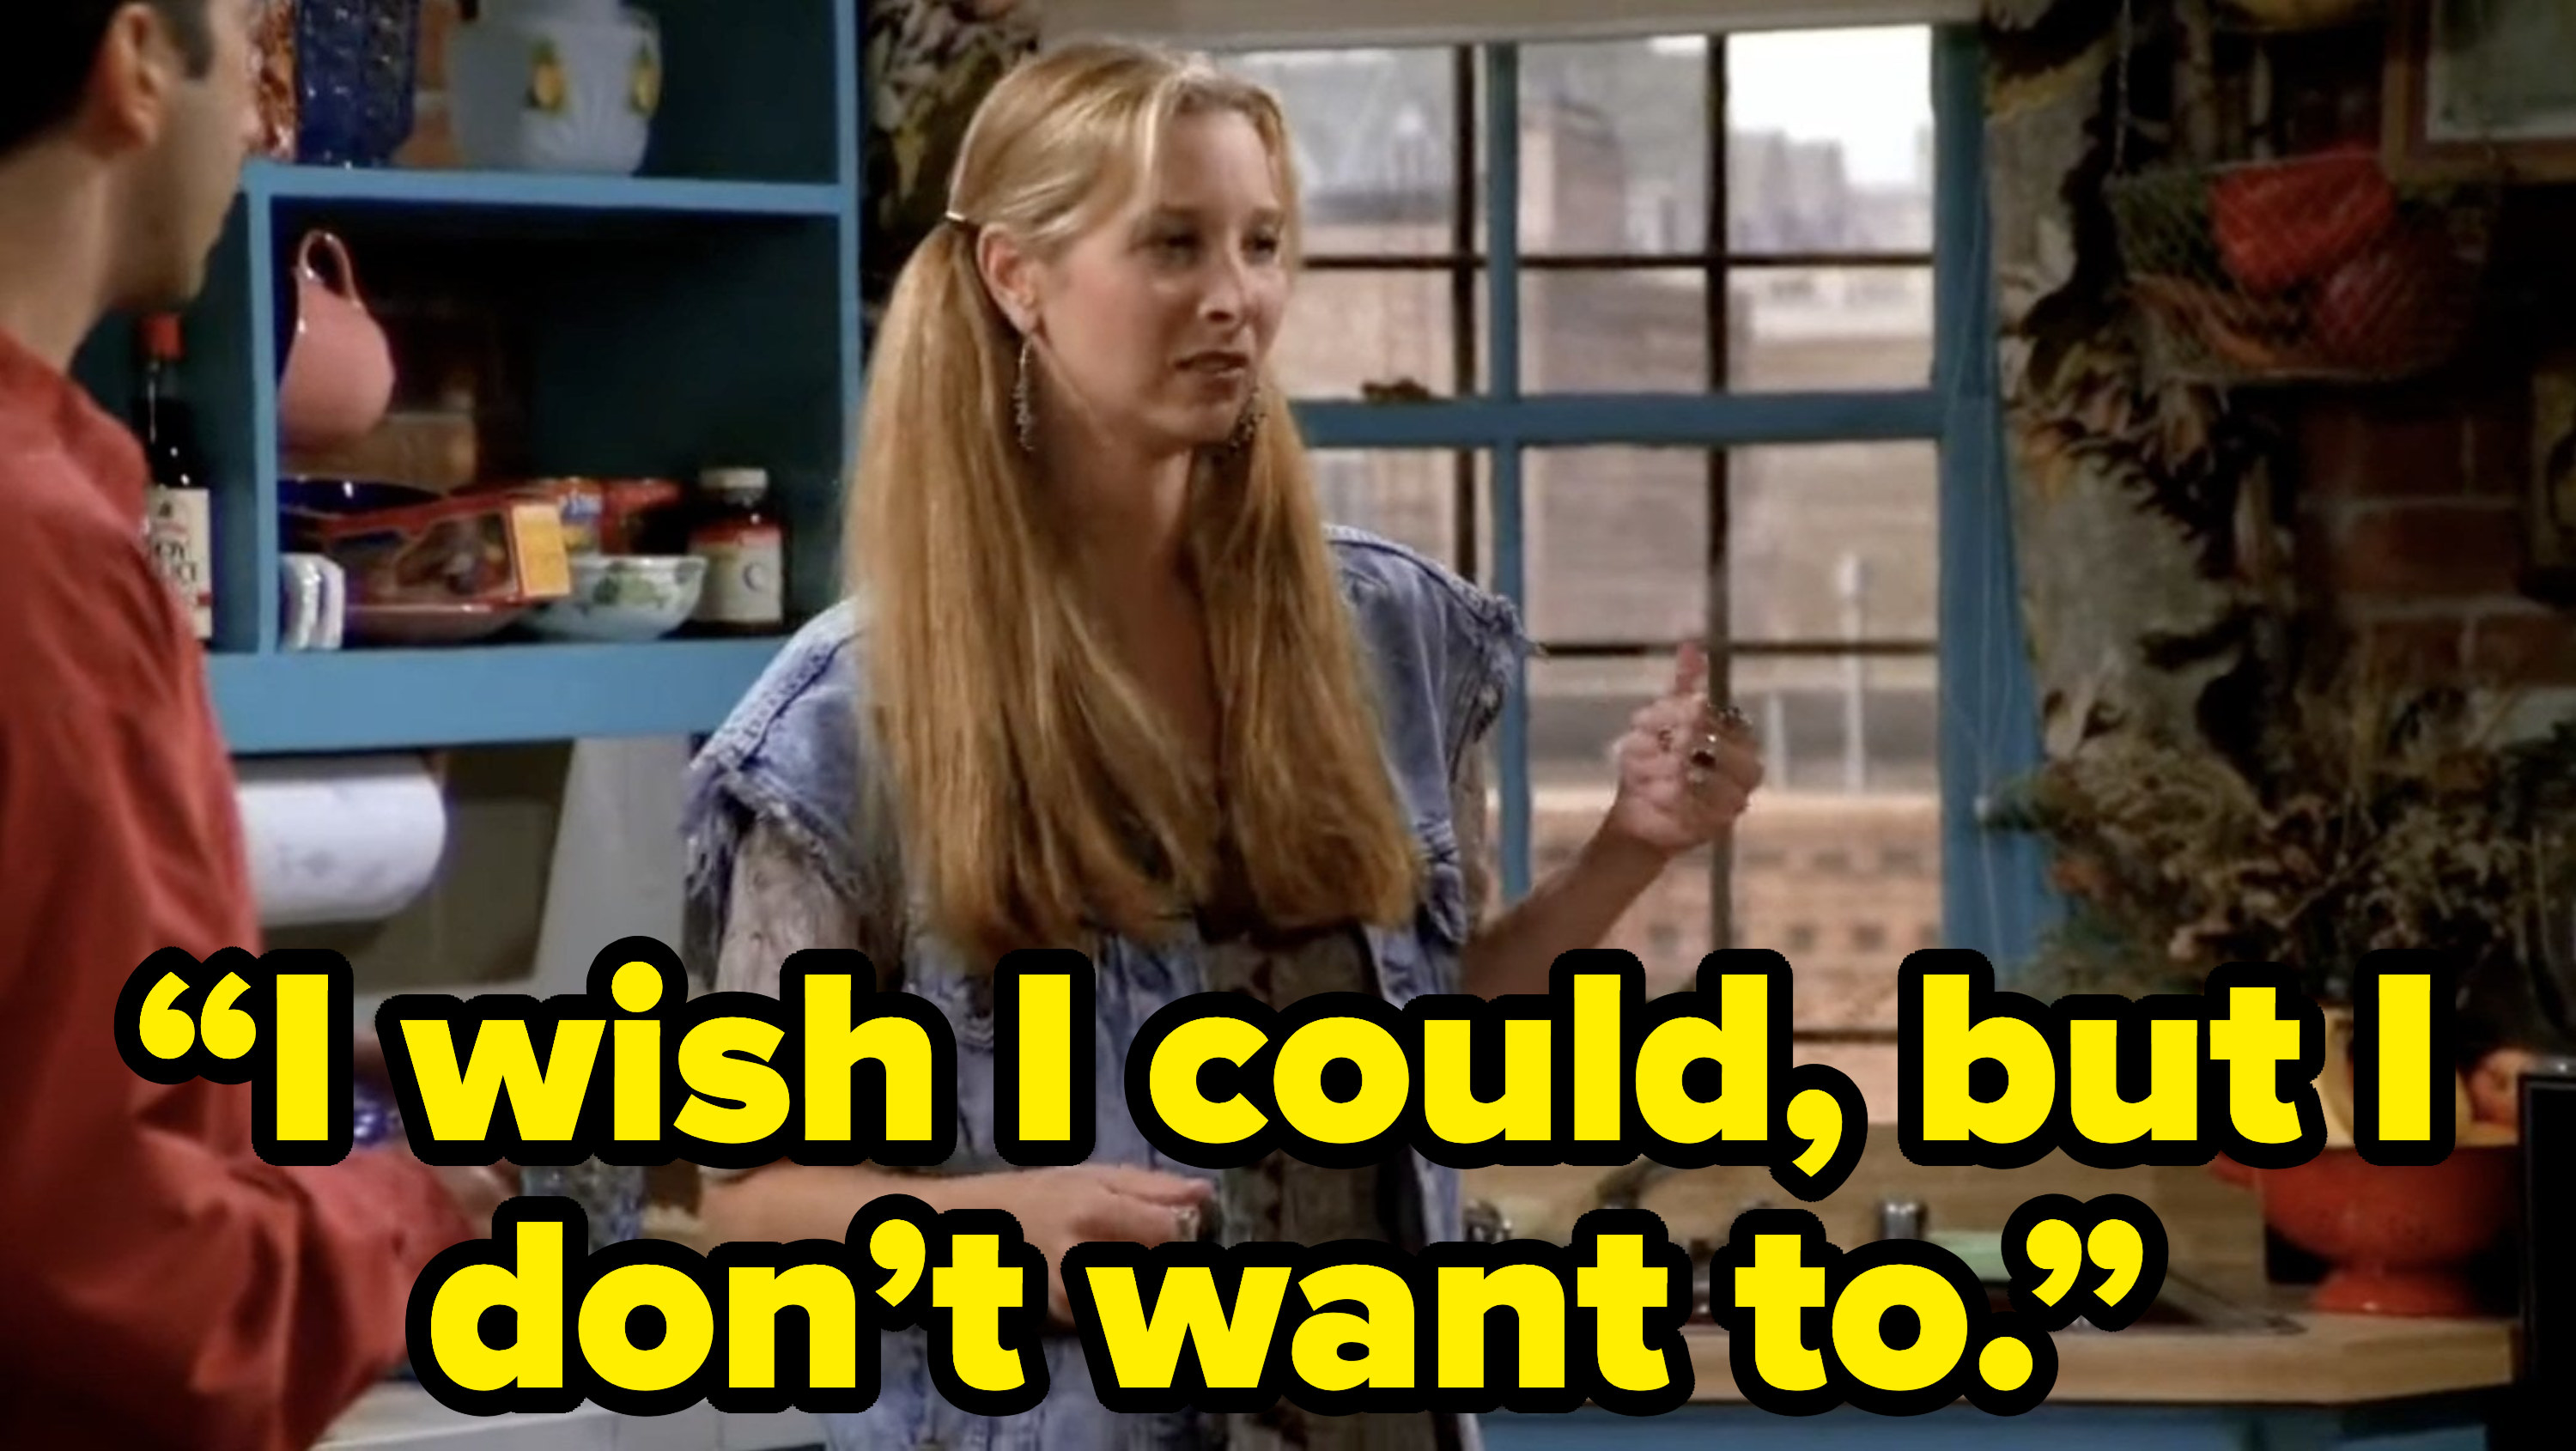 phoebe saying “I wish I could, but I don’t want to.” on friends